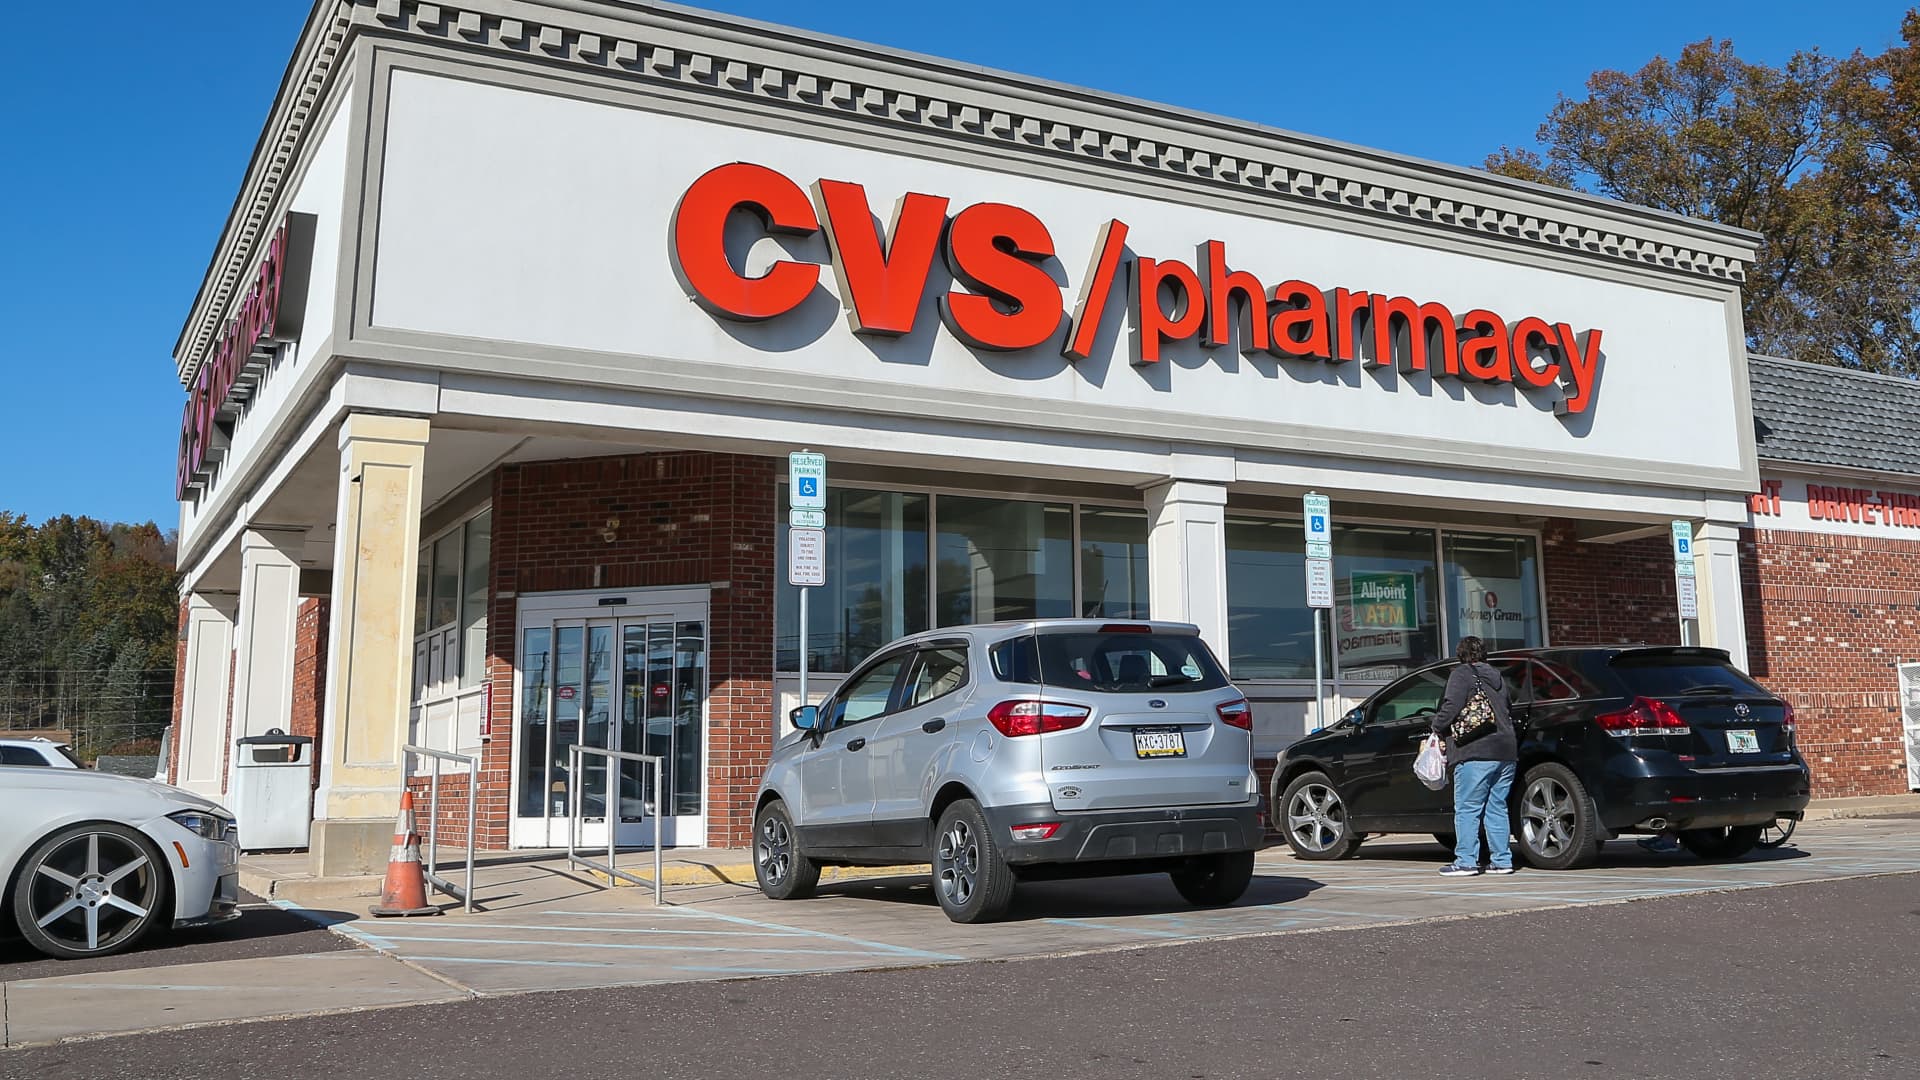 Stocks making the biggest moves midday: Walmart, CVS Health, Wolfspeed and more